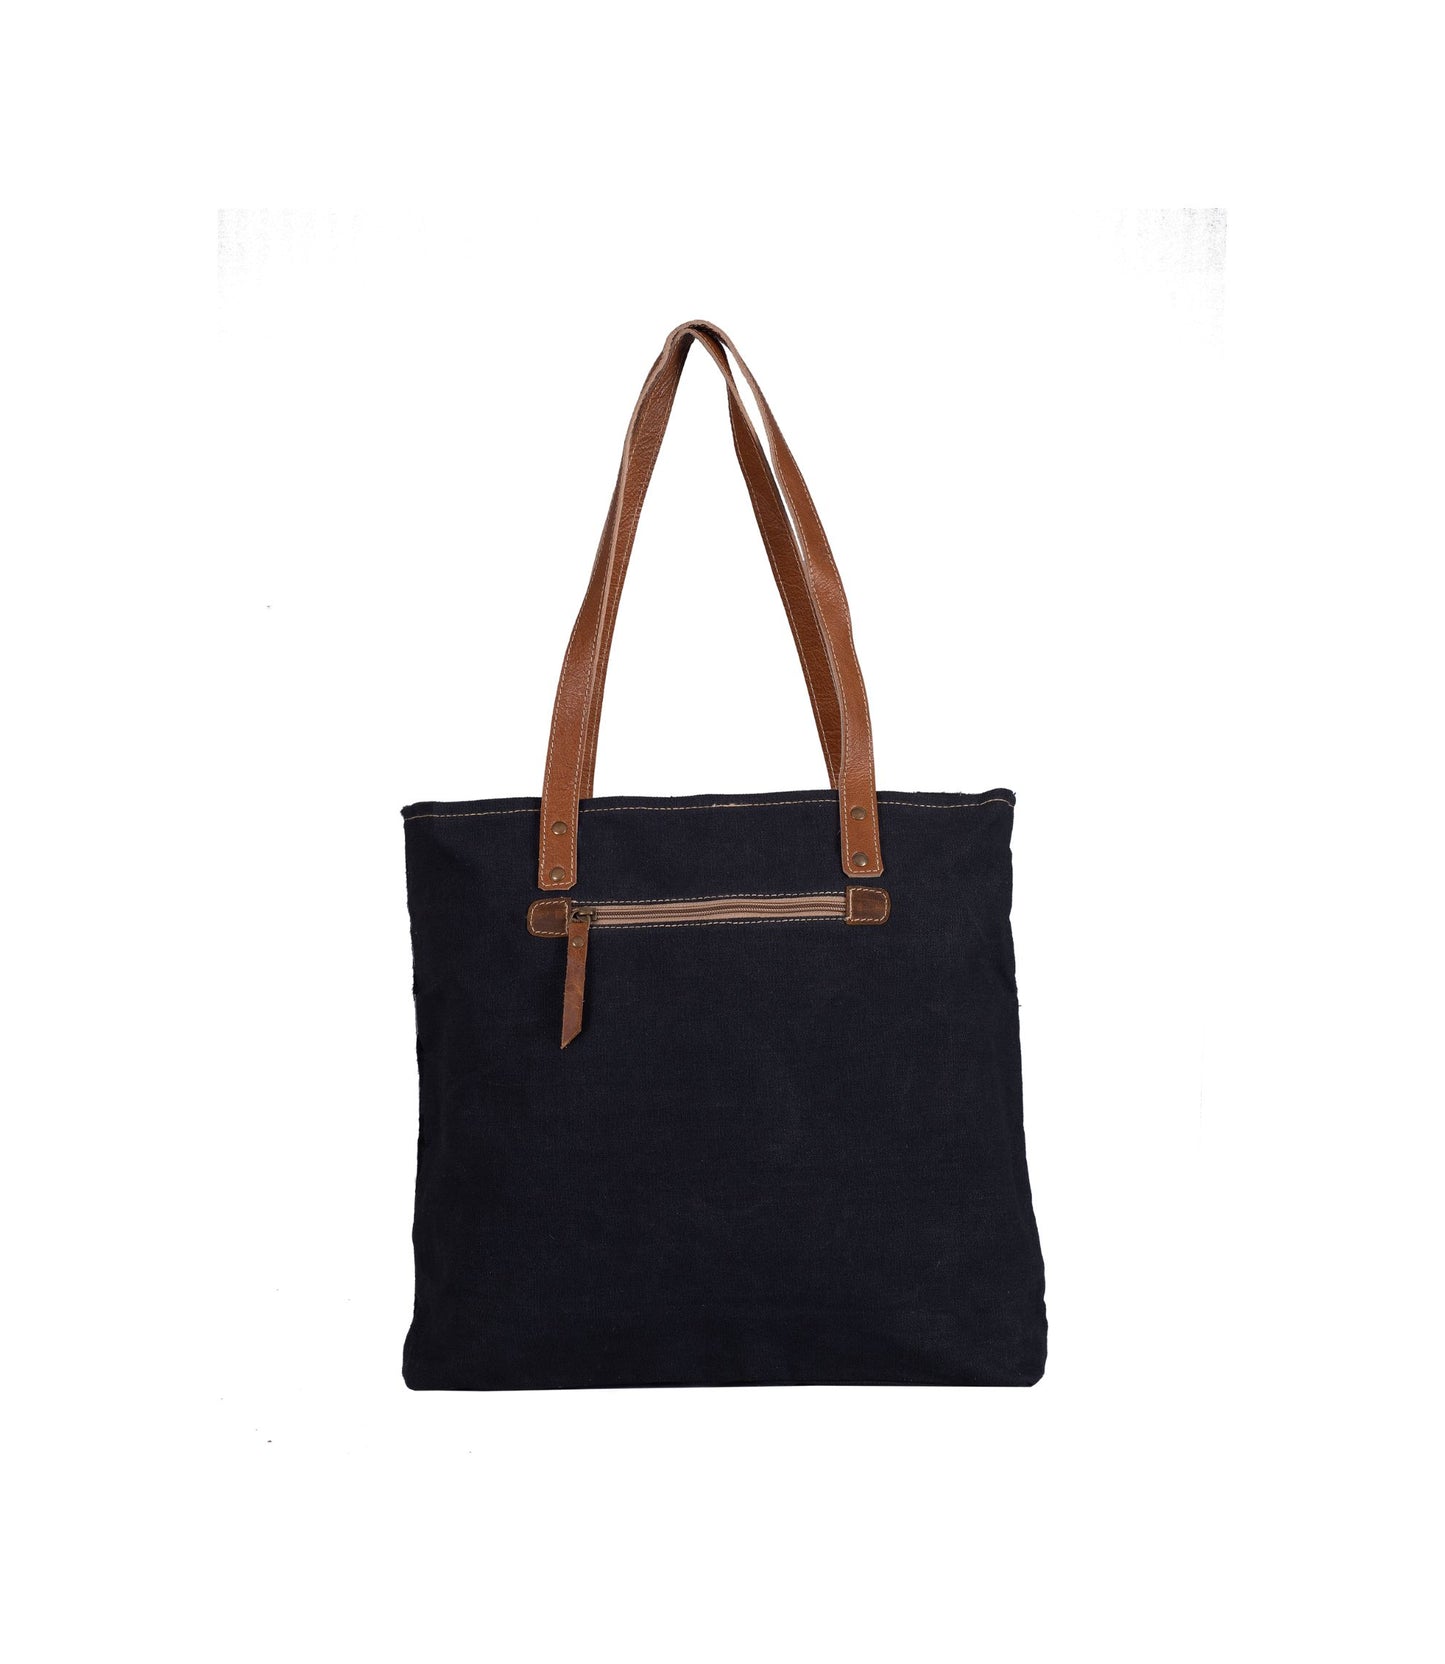 Day and Night Tote Bag